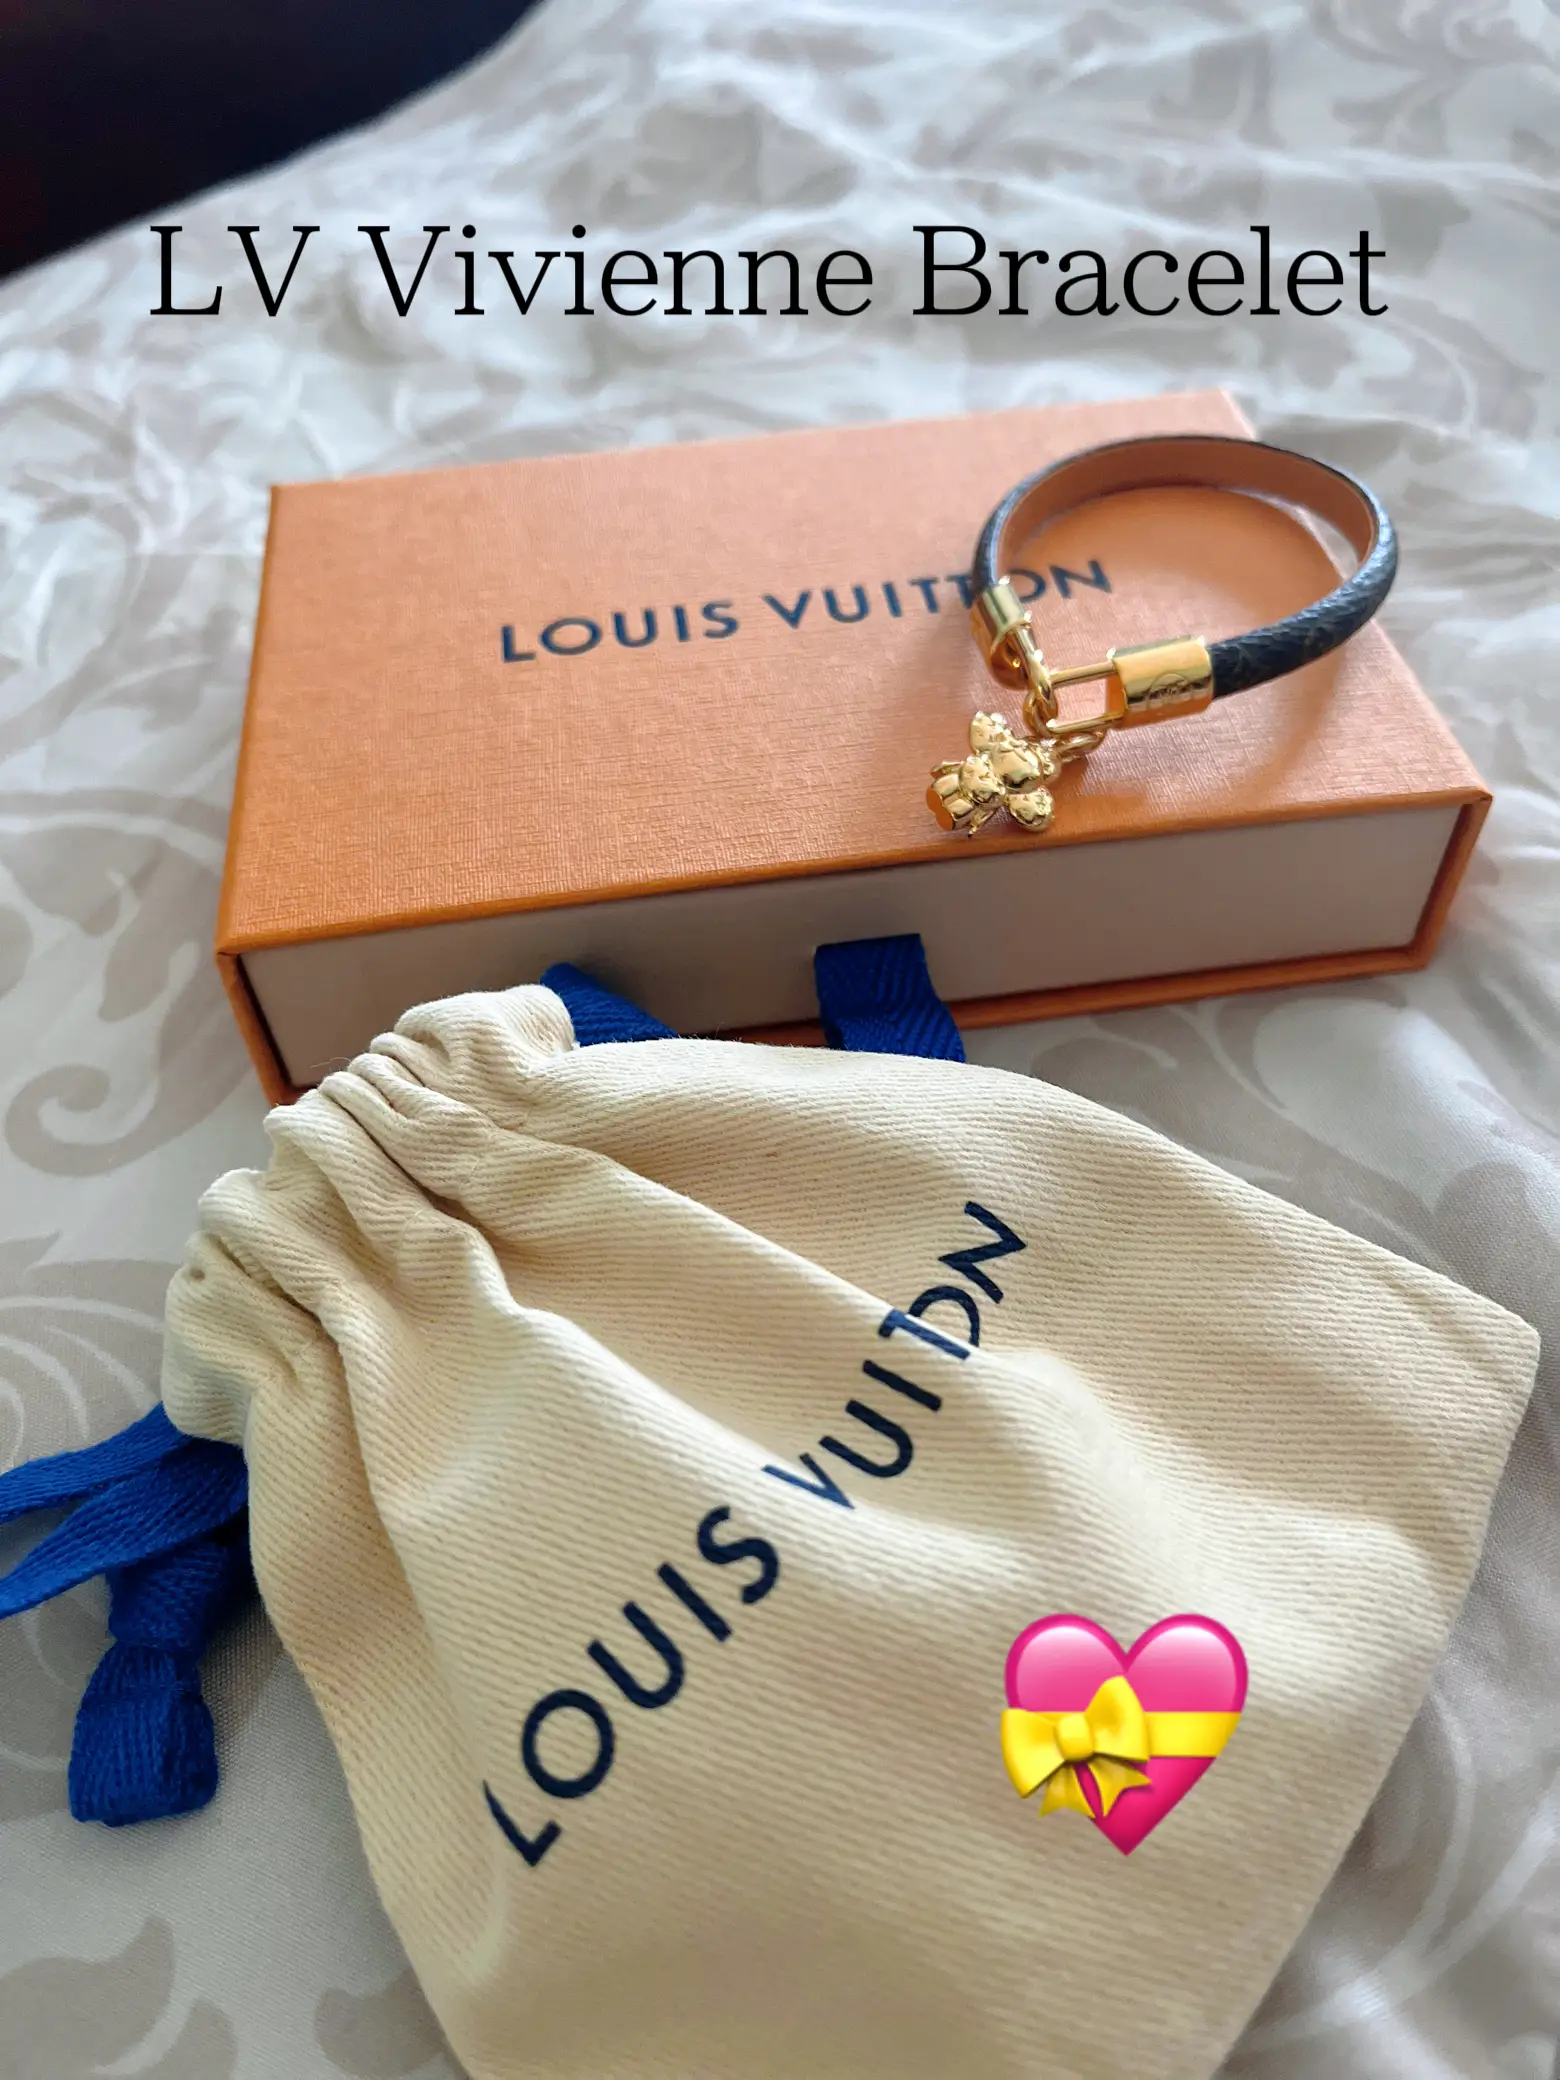 So Adorable, I'm glad to have my first LV bracelet, Gallery posted by  Miarka Coley